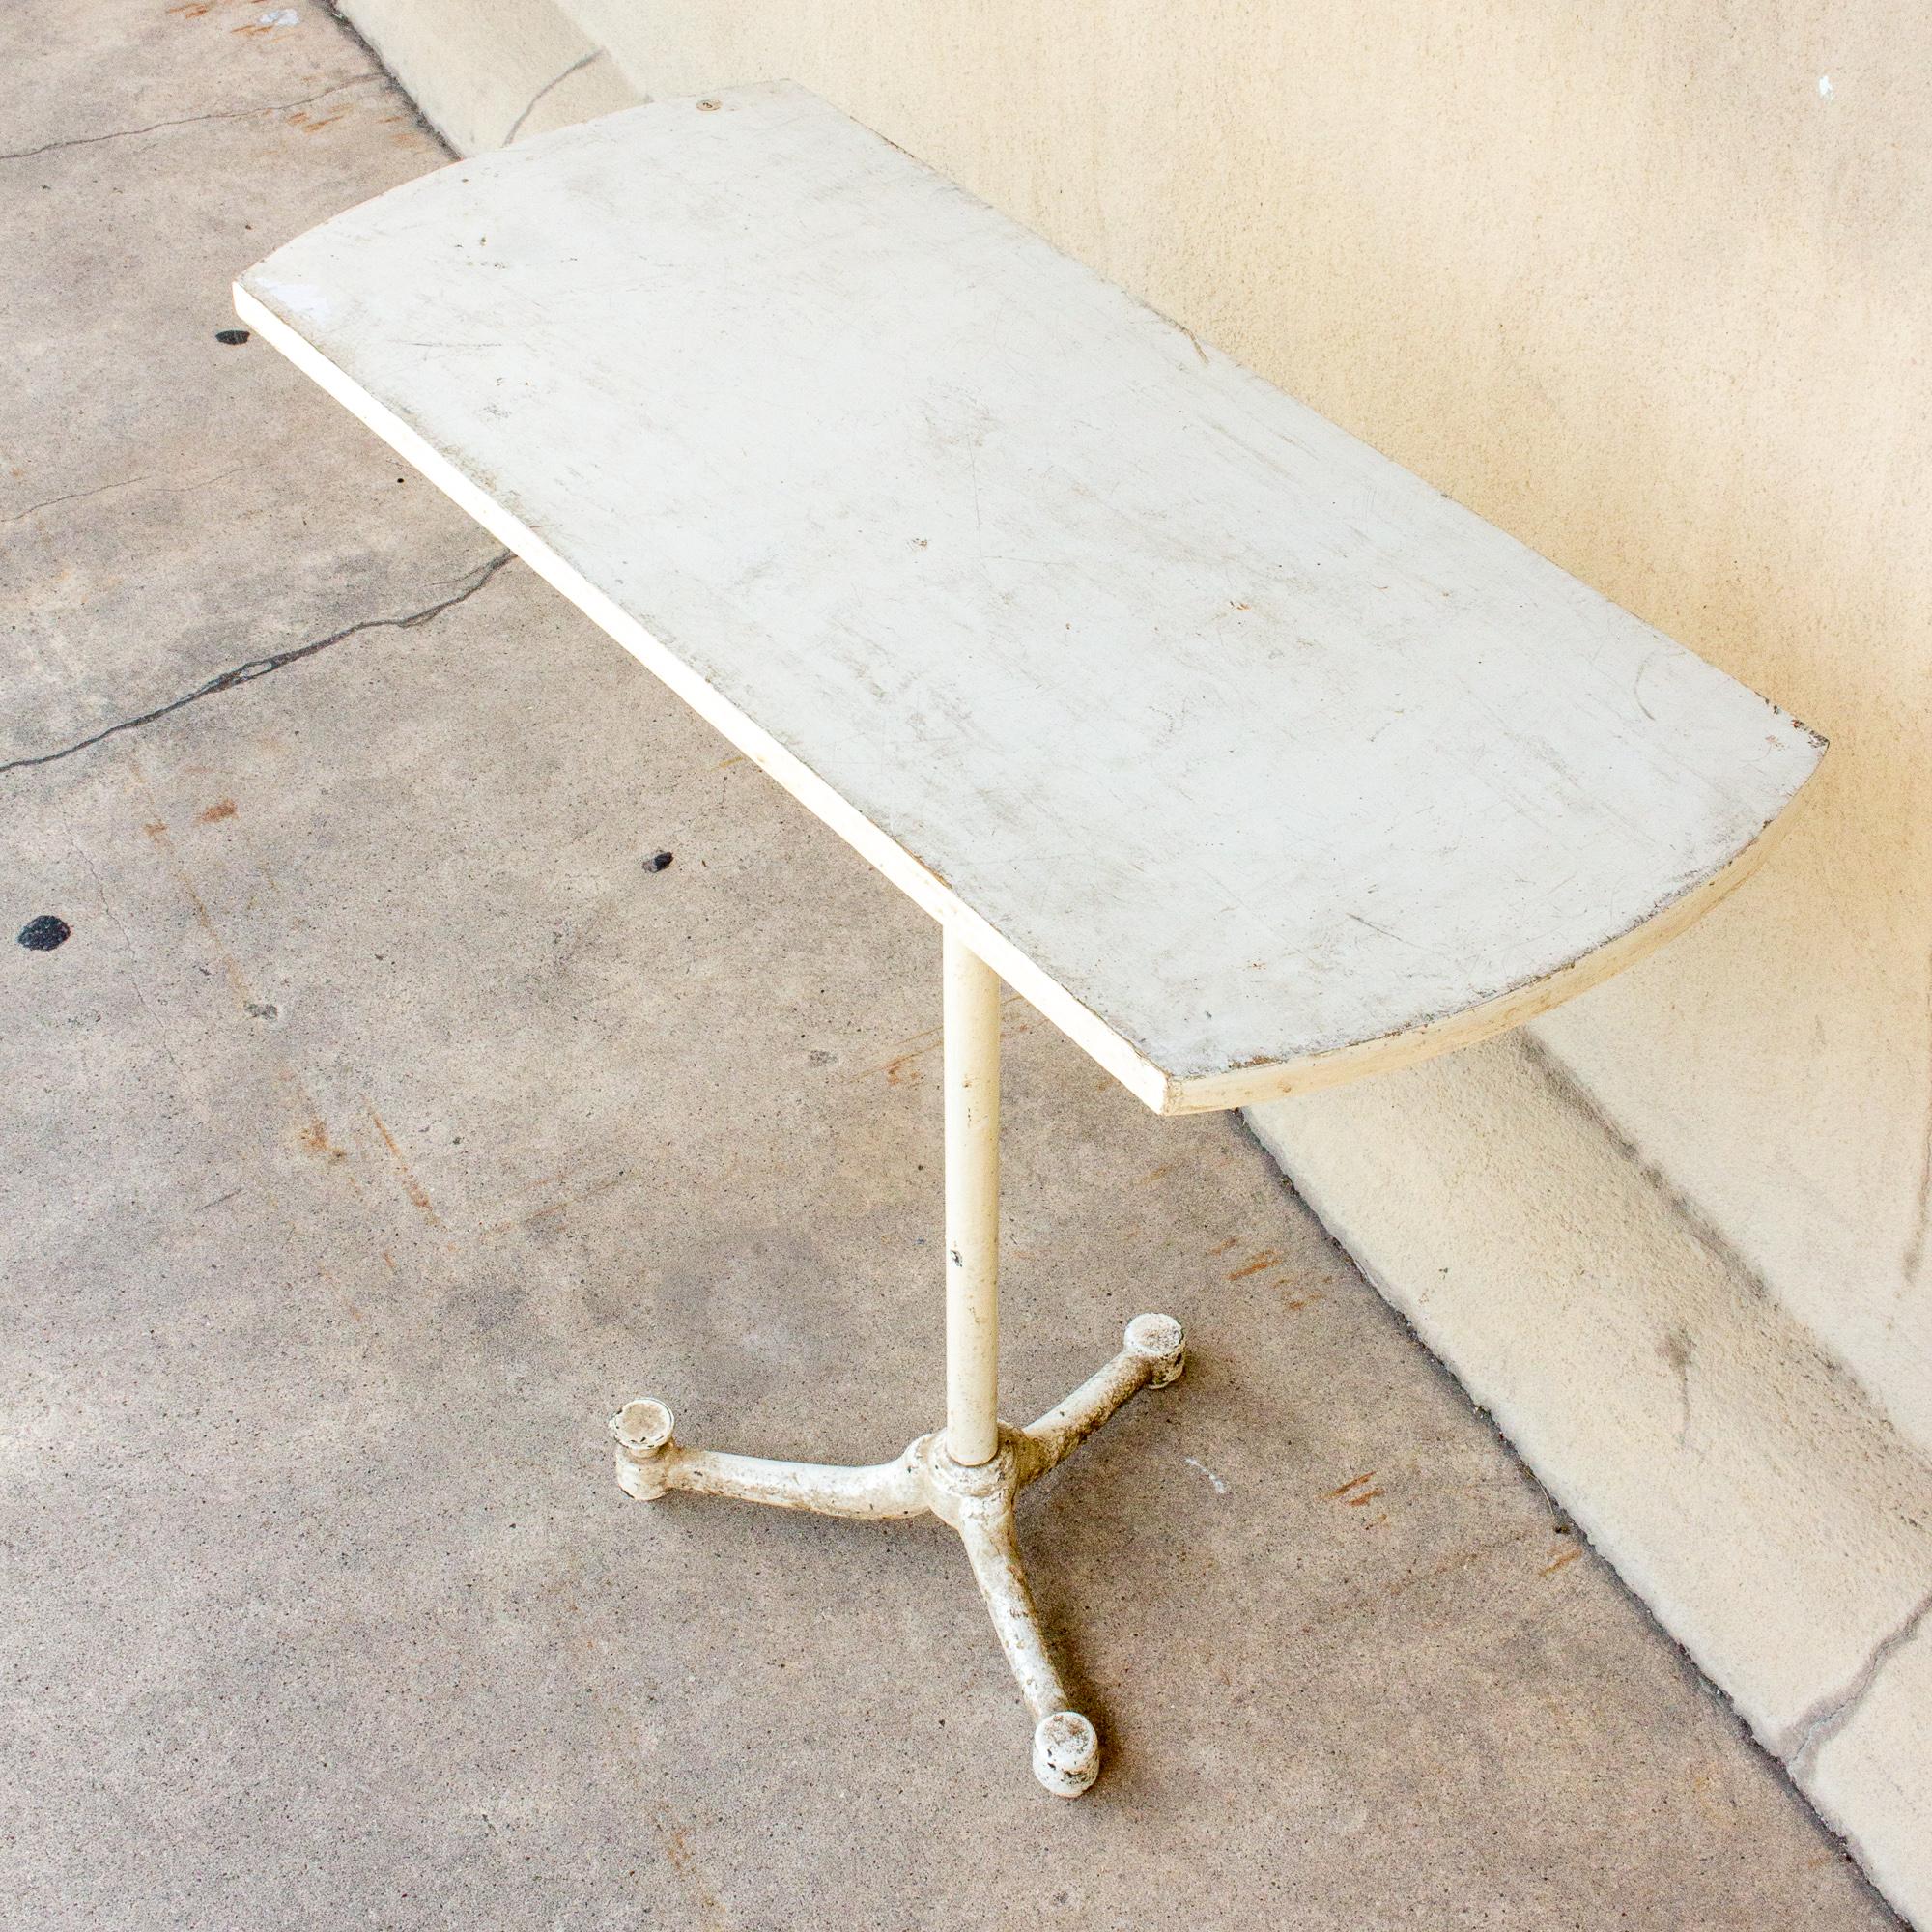 This is a petite side table or console we sourced in France. The top is wood and the base is an iron piece which looks almost like iron pipe used in plumbing. The piece has tripod-feet branching out from the base. Although small it speaks